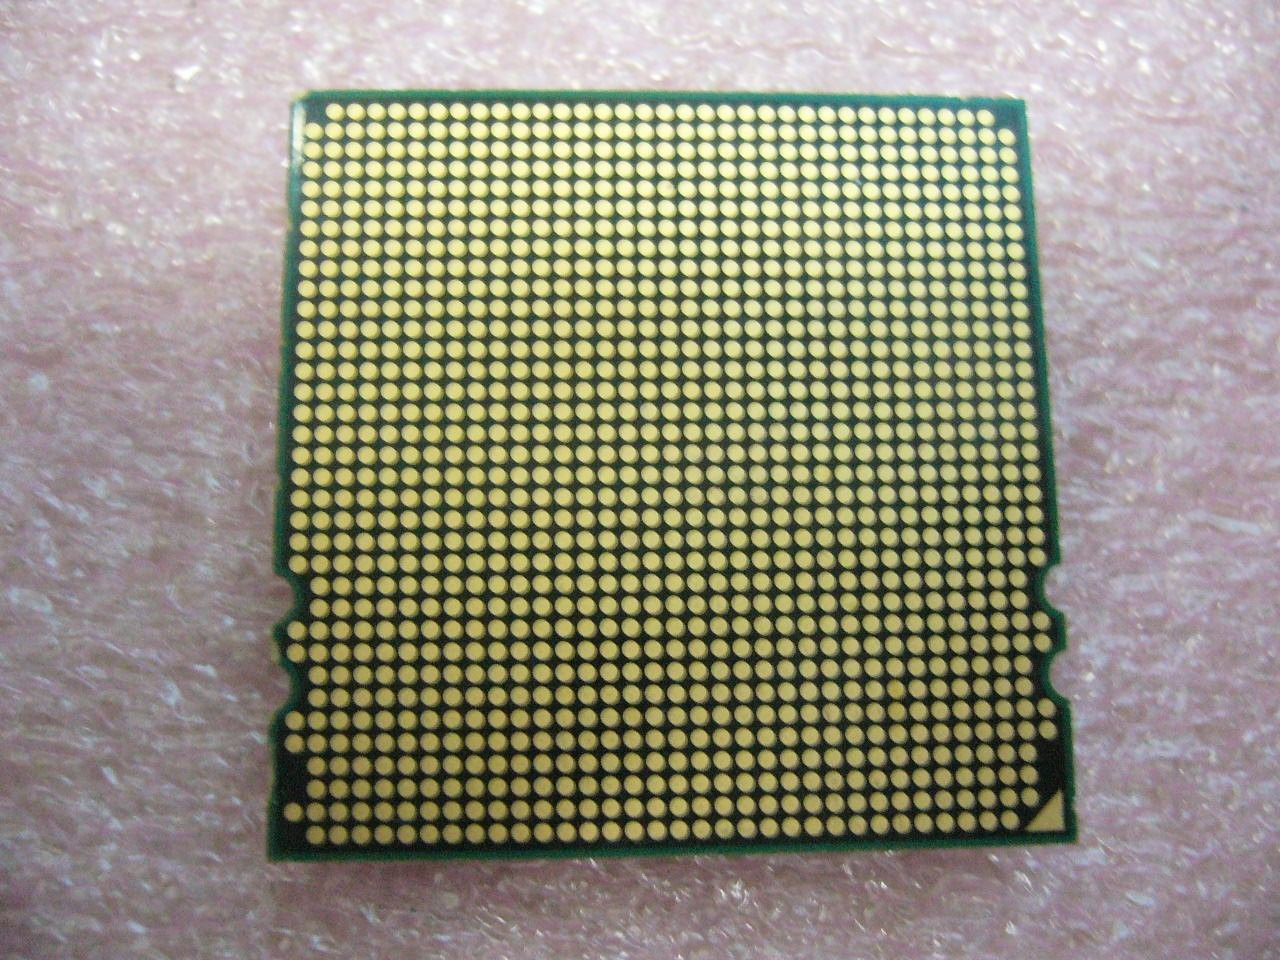 QTY 1x AMD Opteron 2425 HE 2.1 GHz Six Core (OS2425PDS6DGN) CPU Socket F 1207 - Click Image to Close